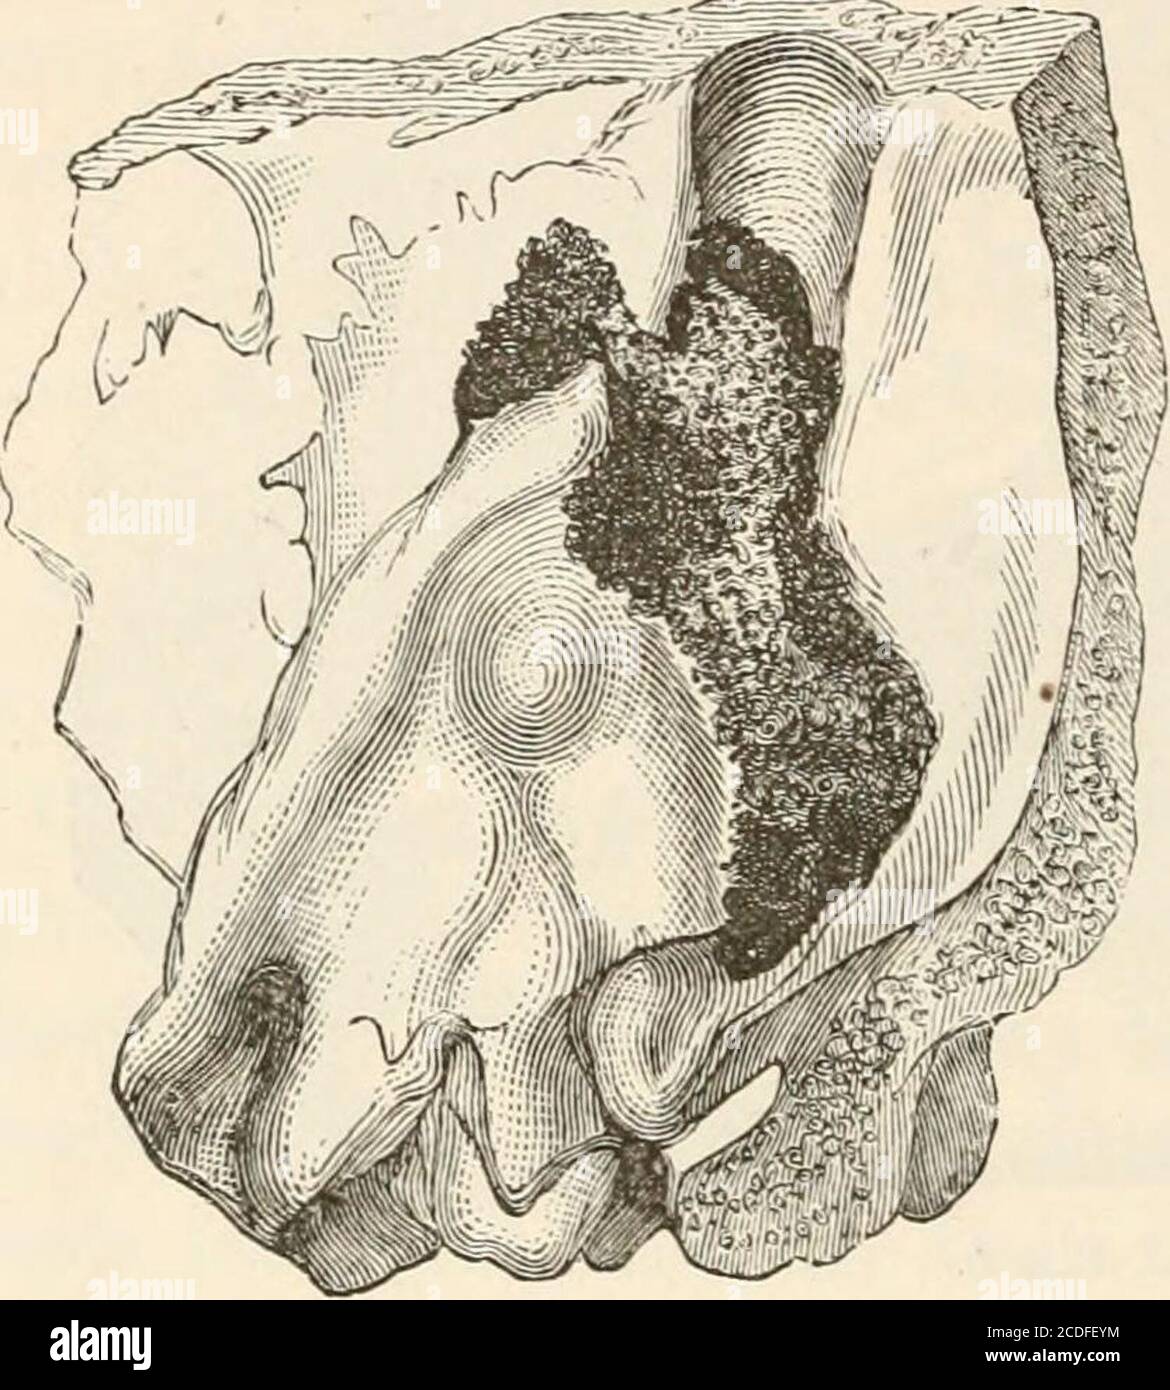 . The pathological anatomy of the ear . h, fiir Phys. Heil-kunde, ix., 1868. AVreden, Petersb. Med. Zeitschr., xvi., 5, S. 61-137.Wendt, Arch, filr Heilkunde ron Wagner, xi., S. 562. 1 Kimmel, Observatio Anat. Patholog. de Cnnali Carotico Carie Syphi-litica Exeso, Lipsiae, 1805, witb an illustration. Boinet, Arch, de Med.,1837. Lavacherie, Bulletin de IAcad, de Med., 1848, vol. vii., p. 789. San- 16 PATHOLOGY OF THE EAR. media, of the large venous sinuses or of the bulbusvenae jugularis. By which channels the extension of the purulentinflammation takes place frequently remains uncertainat the Stock Photo